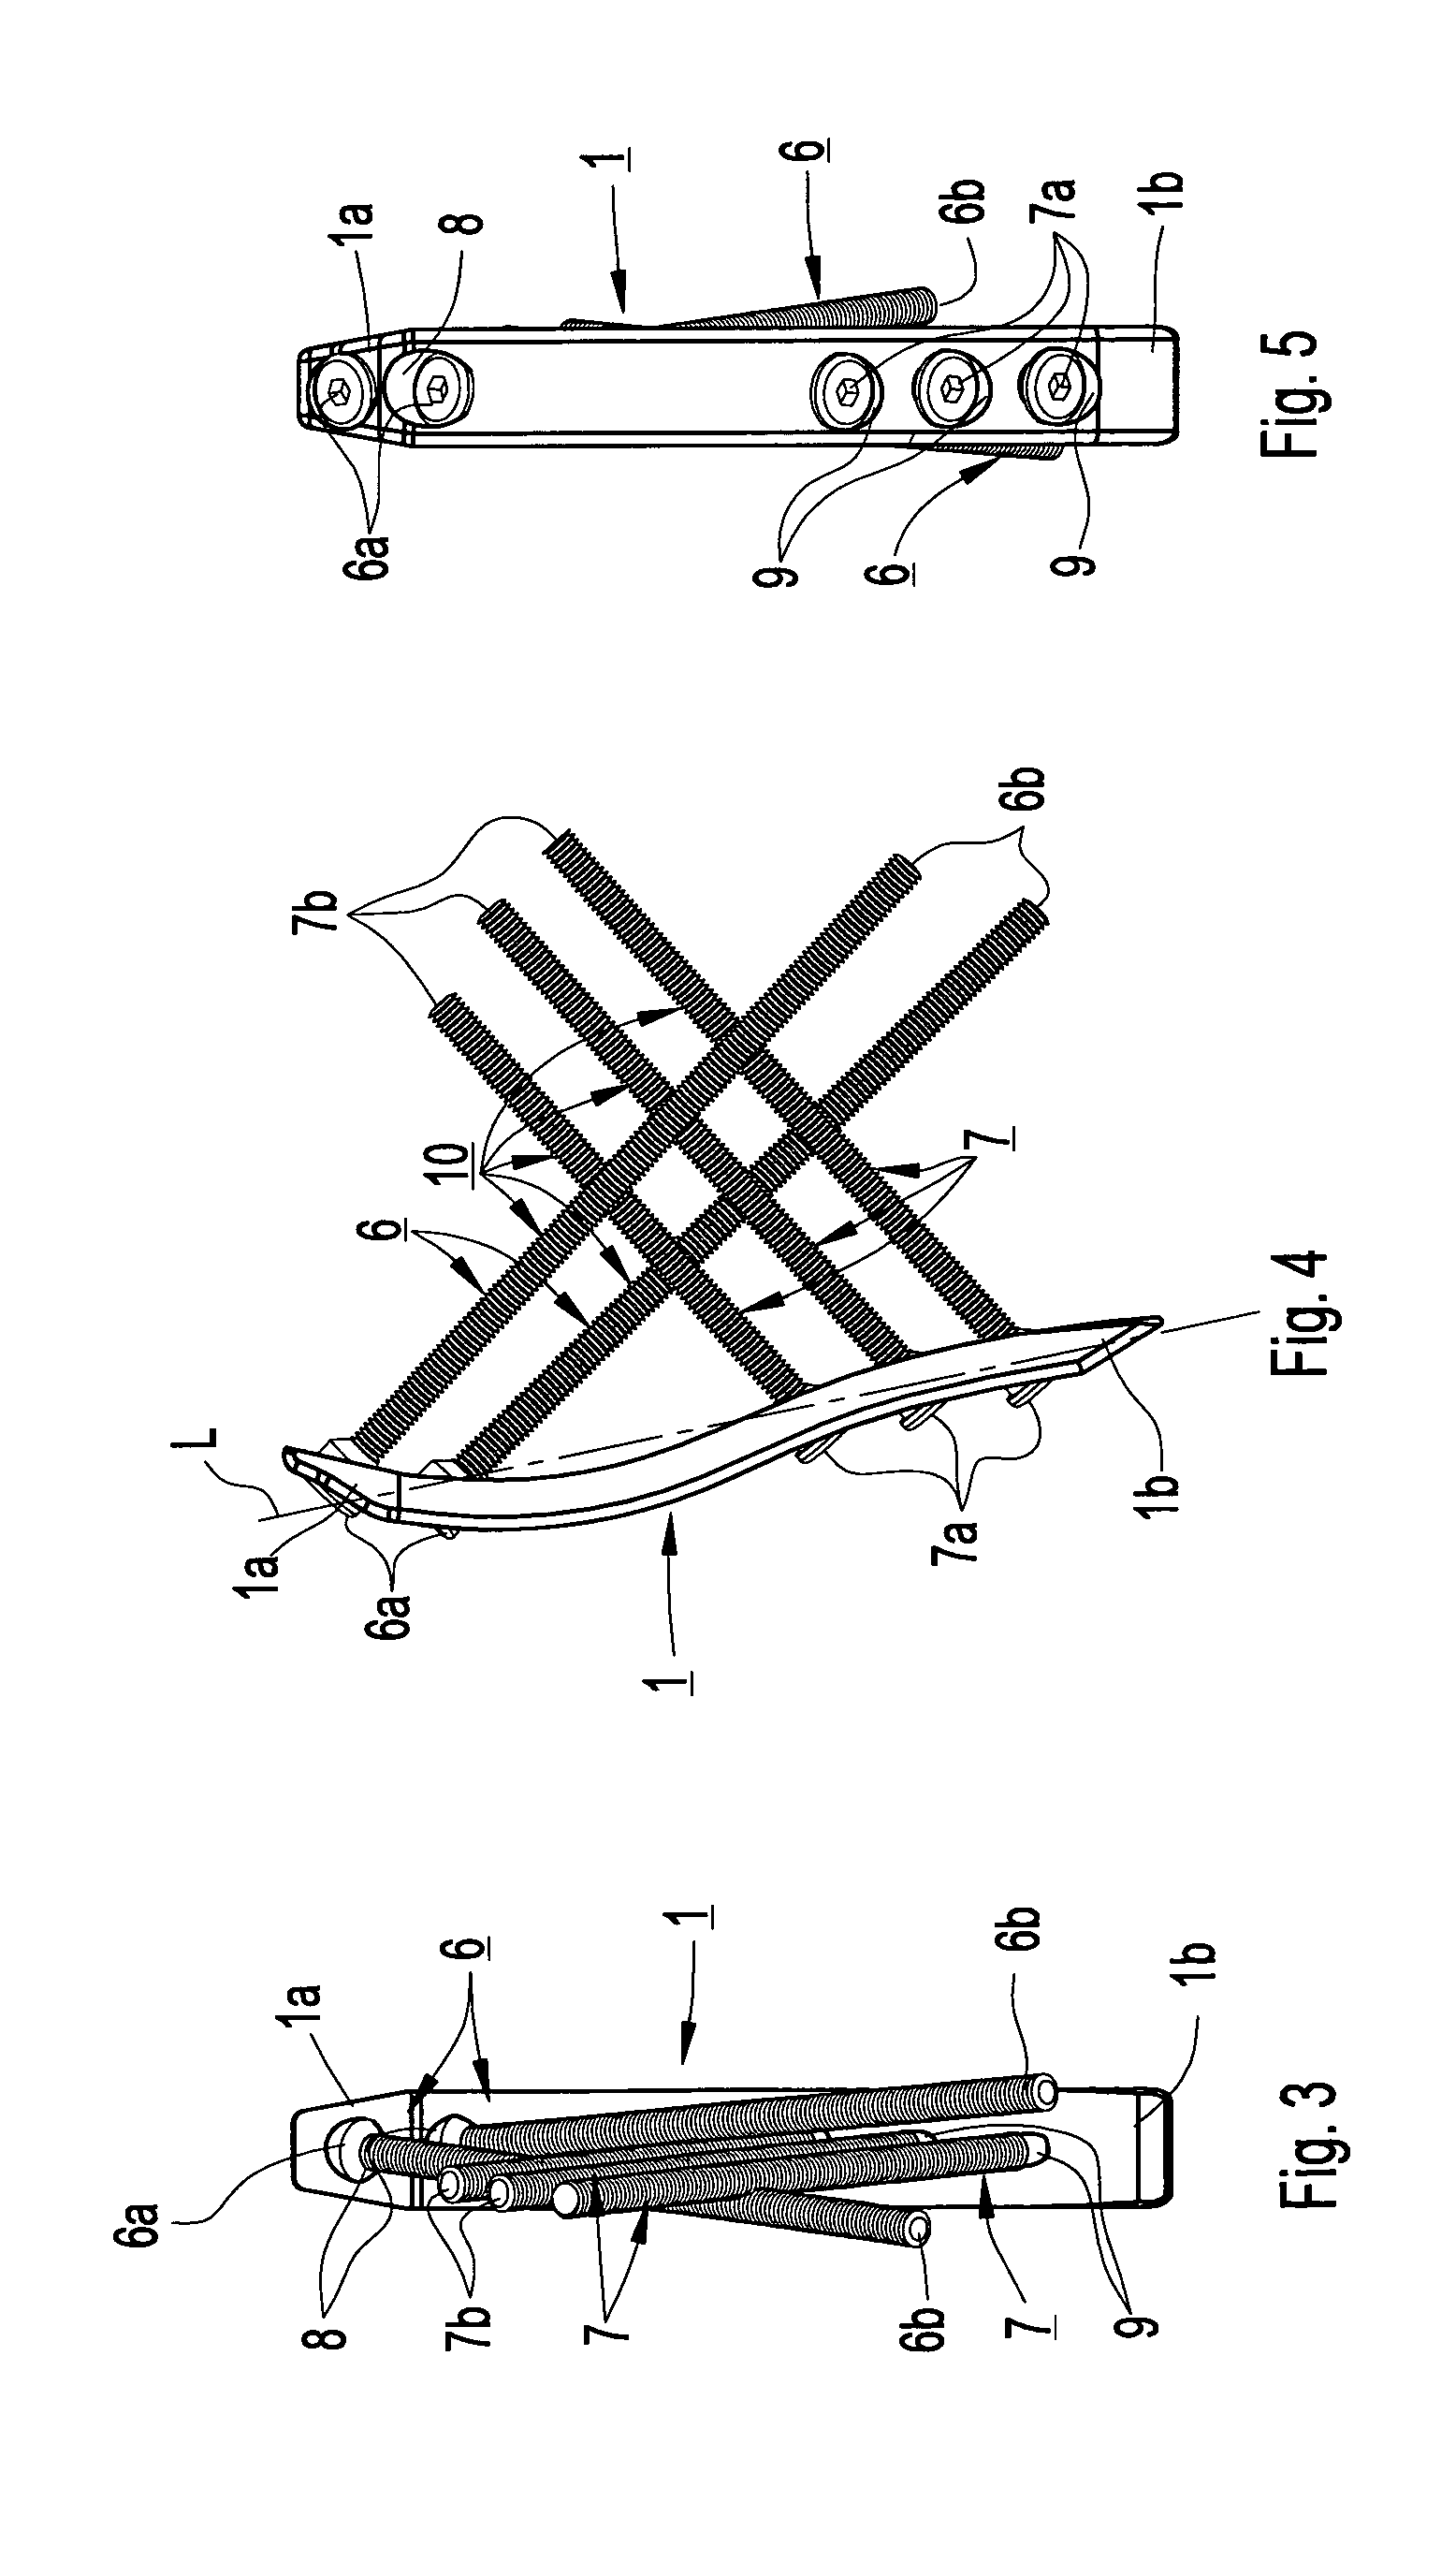 Device for internal fixation of the bone fragments in a radius fracture